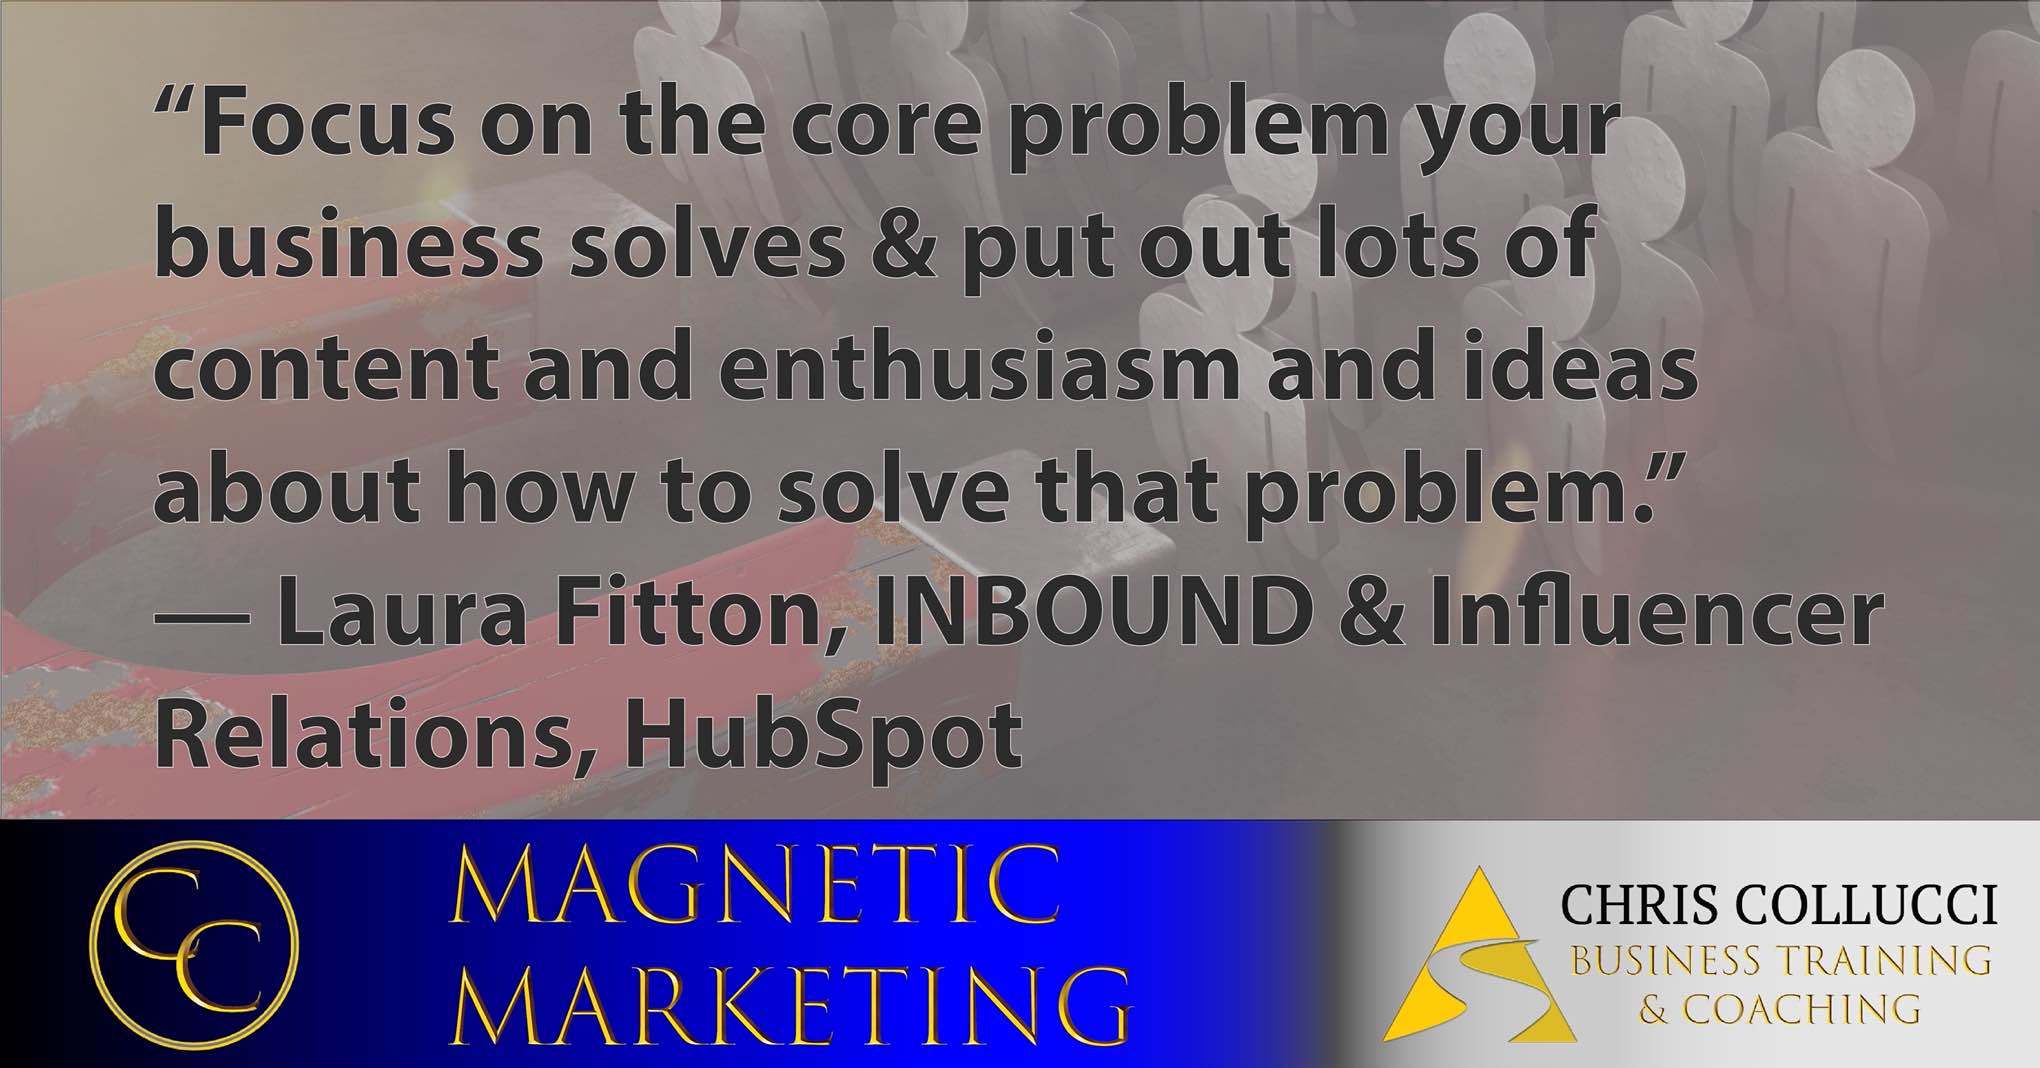 inspirational marketing quote from Hubspot Executive Laura Fitton focus on the core problem your business solves and put lots of content and enthusiasm and ideas about how t solve that problem